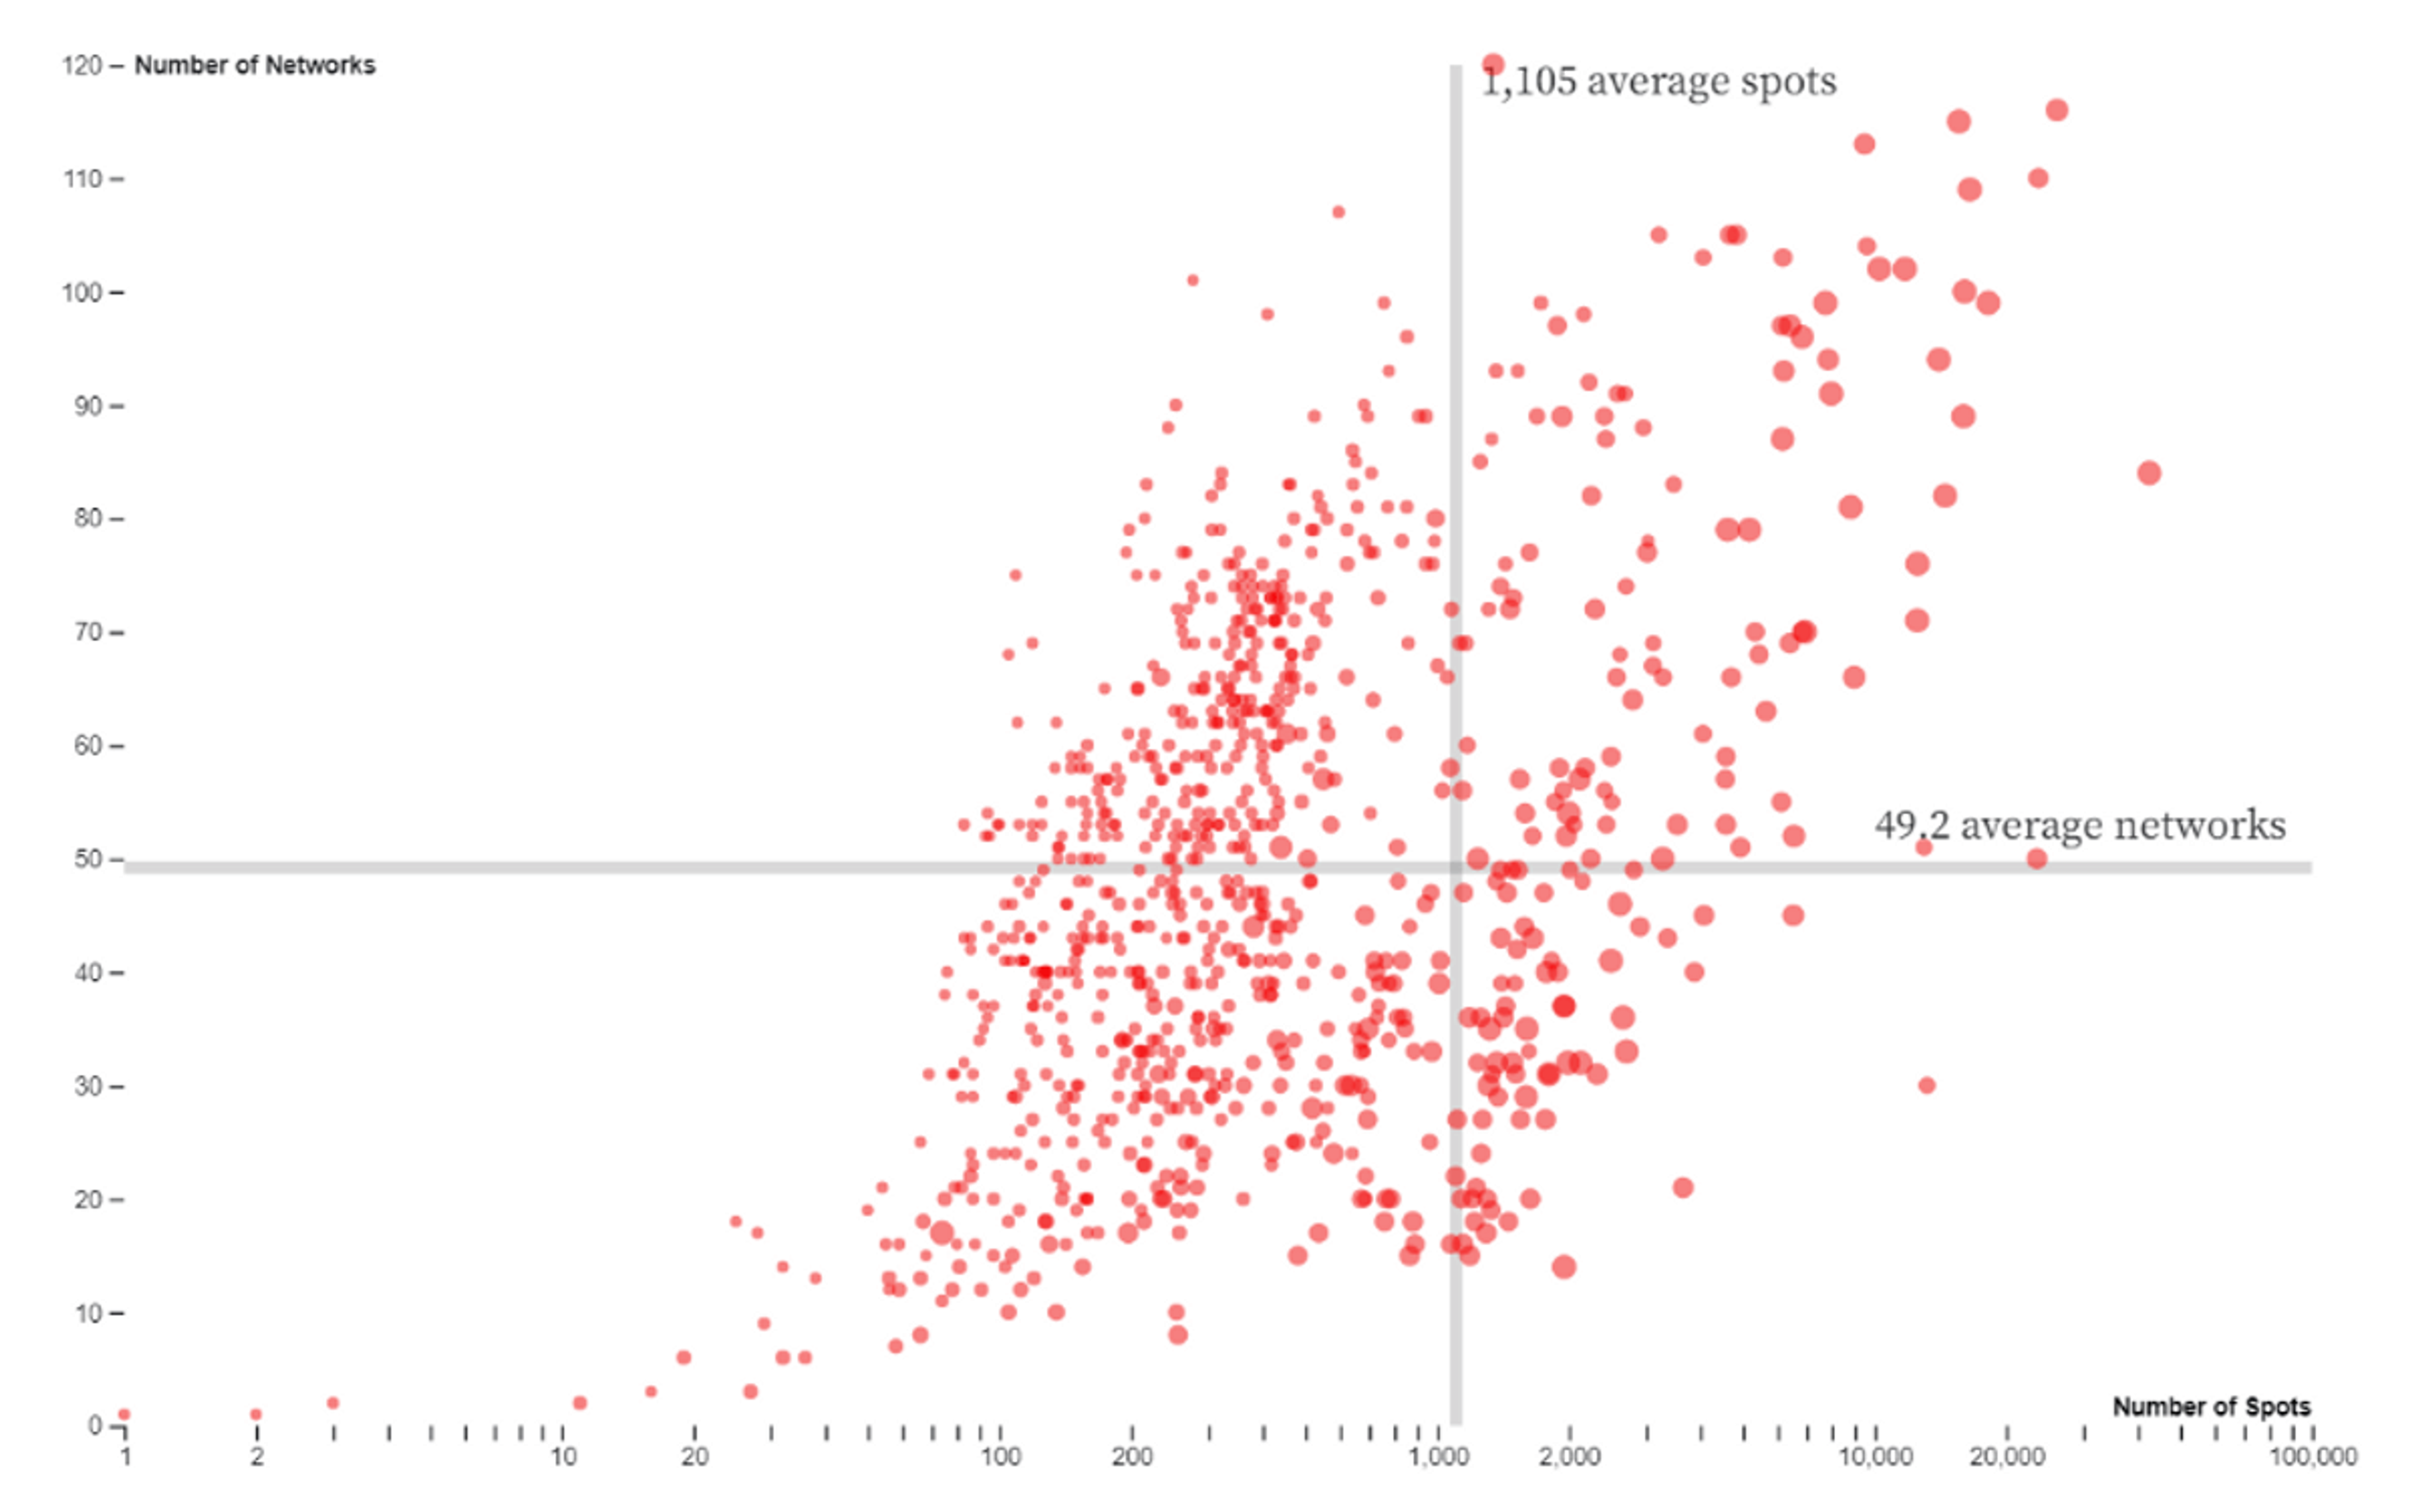 Scatter plot showing the average number of TV ad spots and average number of TV networks.